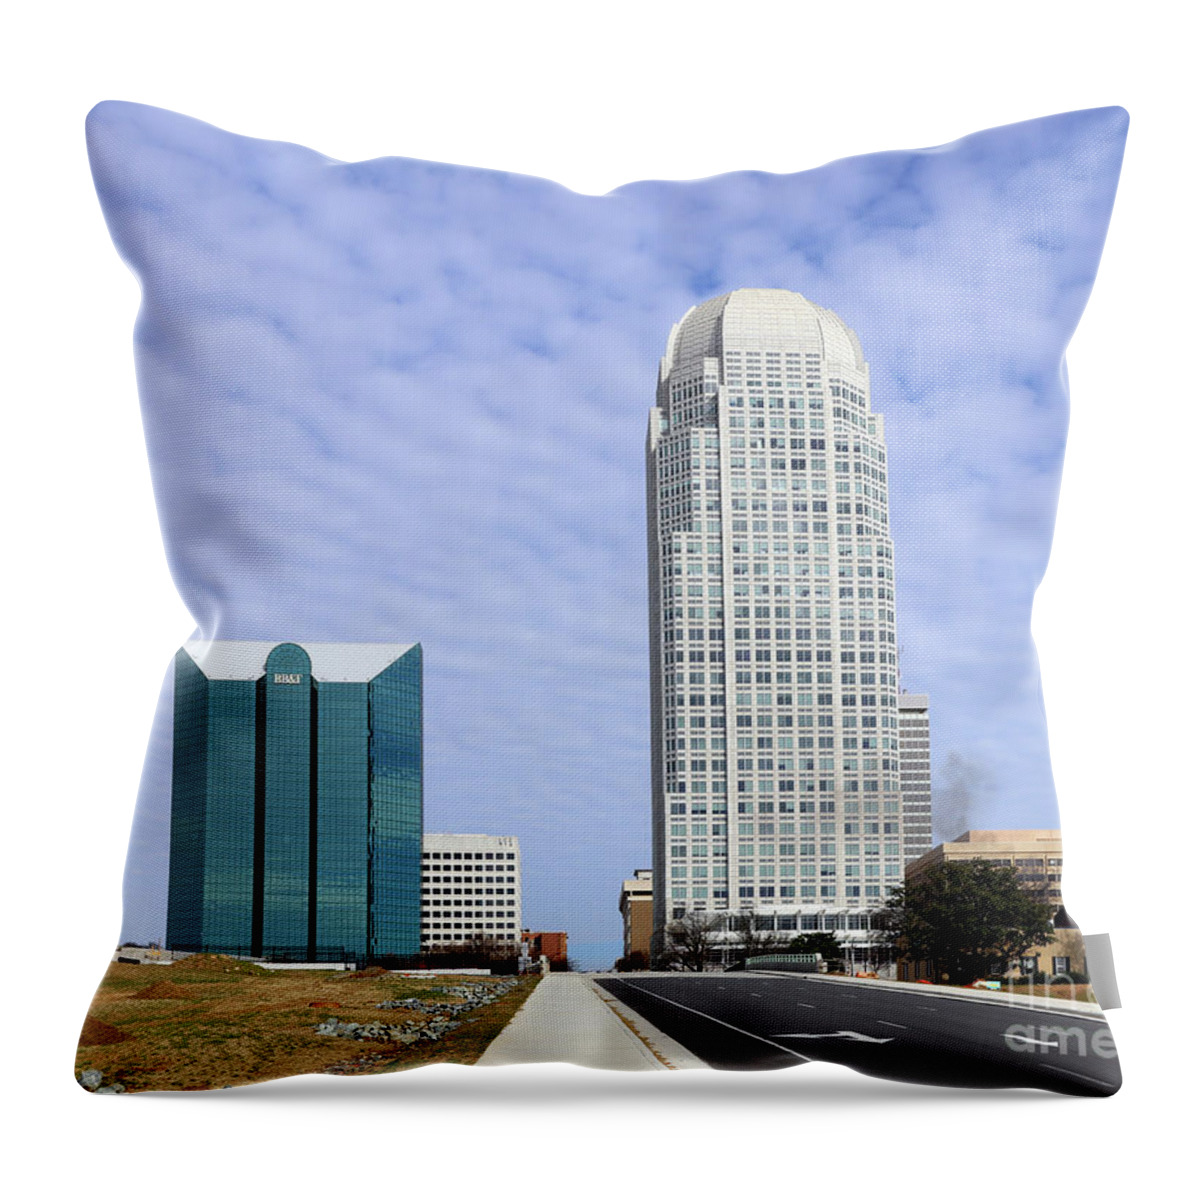 Bb&t Building Throw Pillow featuring the photograph Downtown Winston Salem 1407 by Jack Schultz